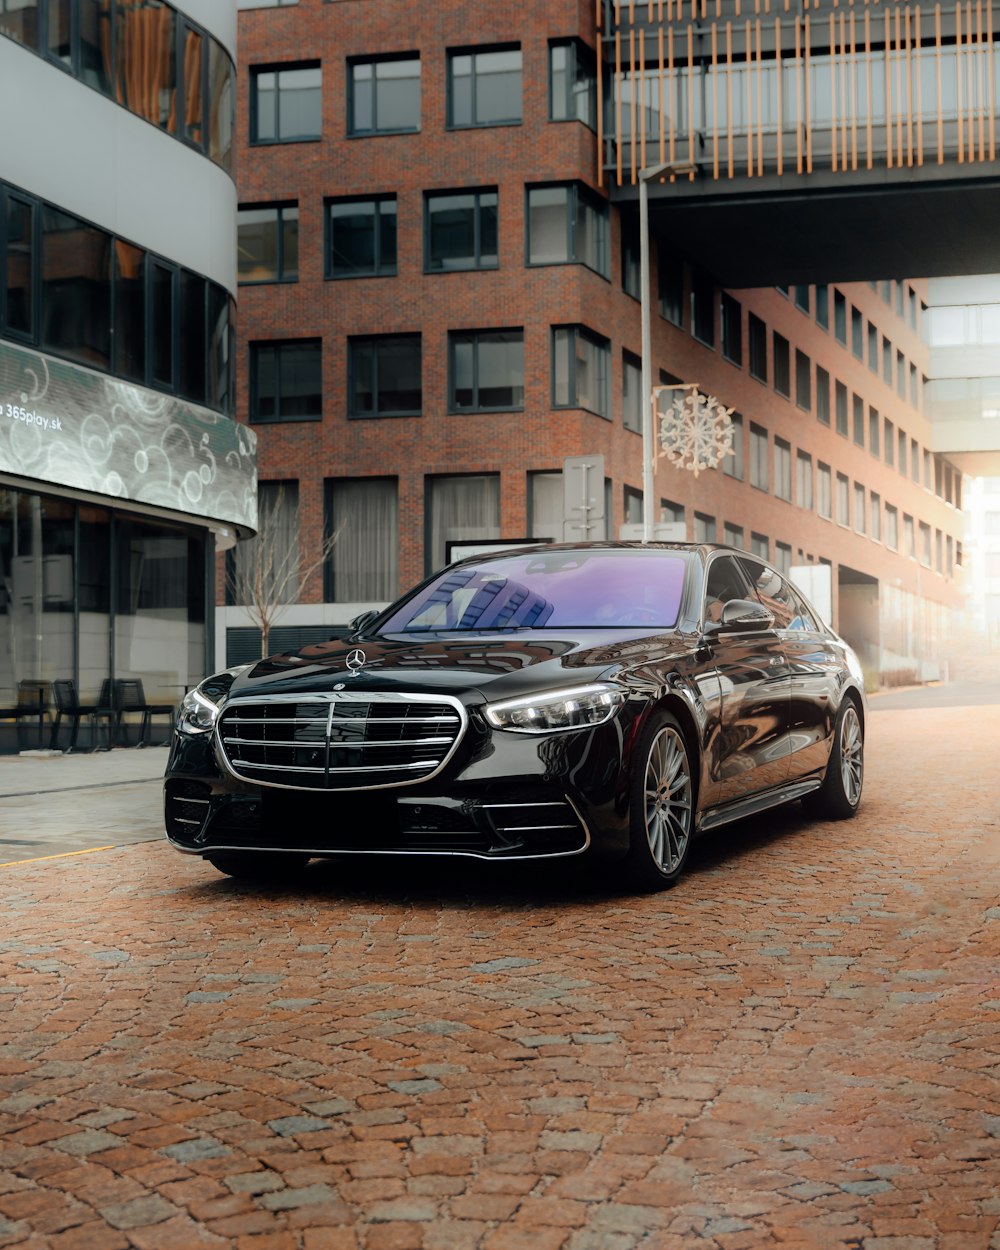 Mercedes S Class Pictures | Download Free Images on Unsplash